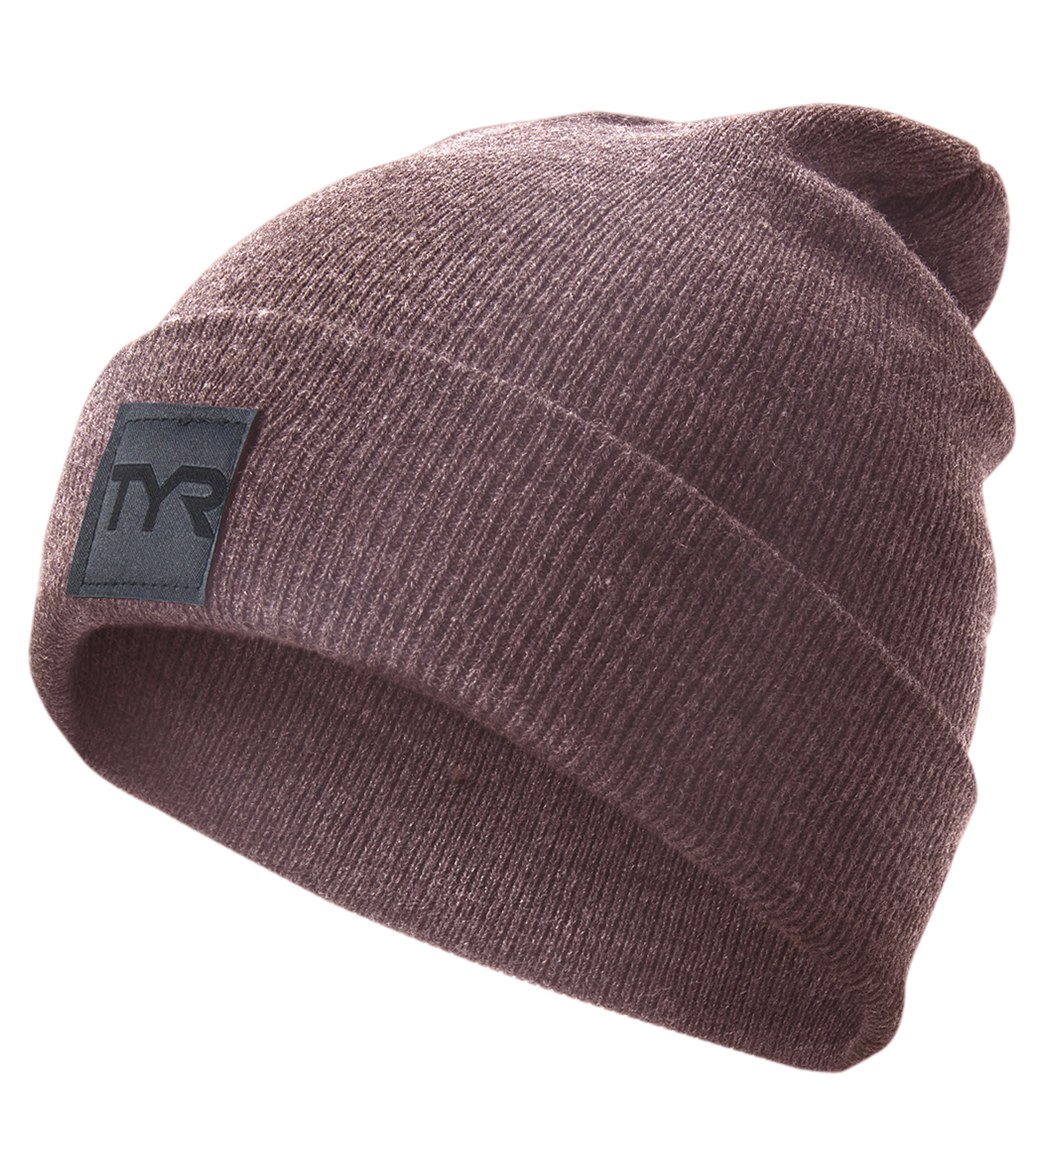 TYR Cuffed Knit Beanie - Light Pink One Size - Swimoutlet.com